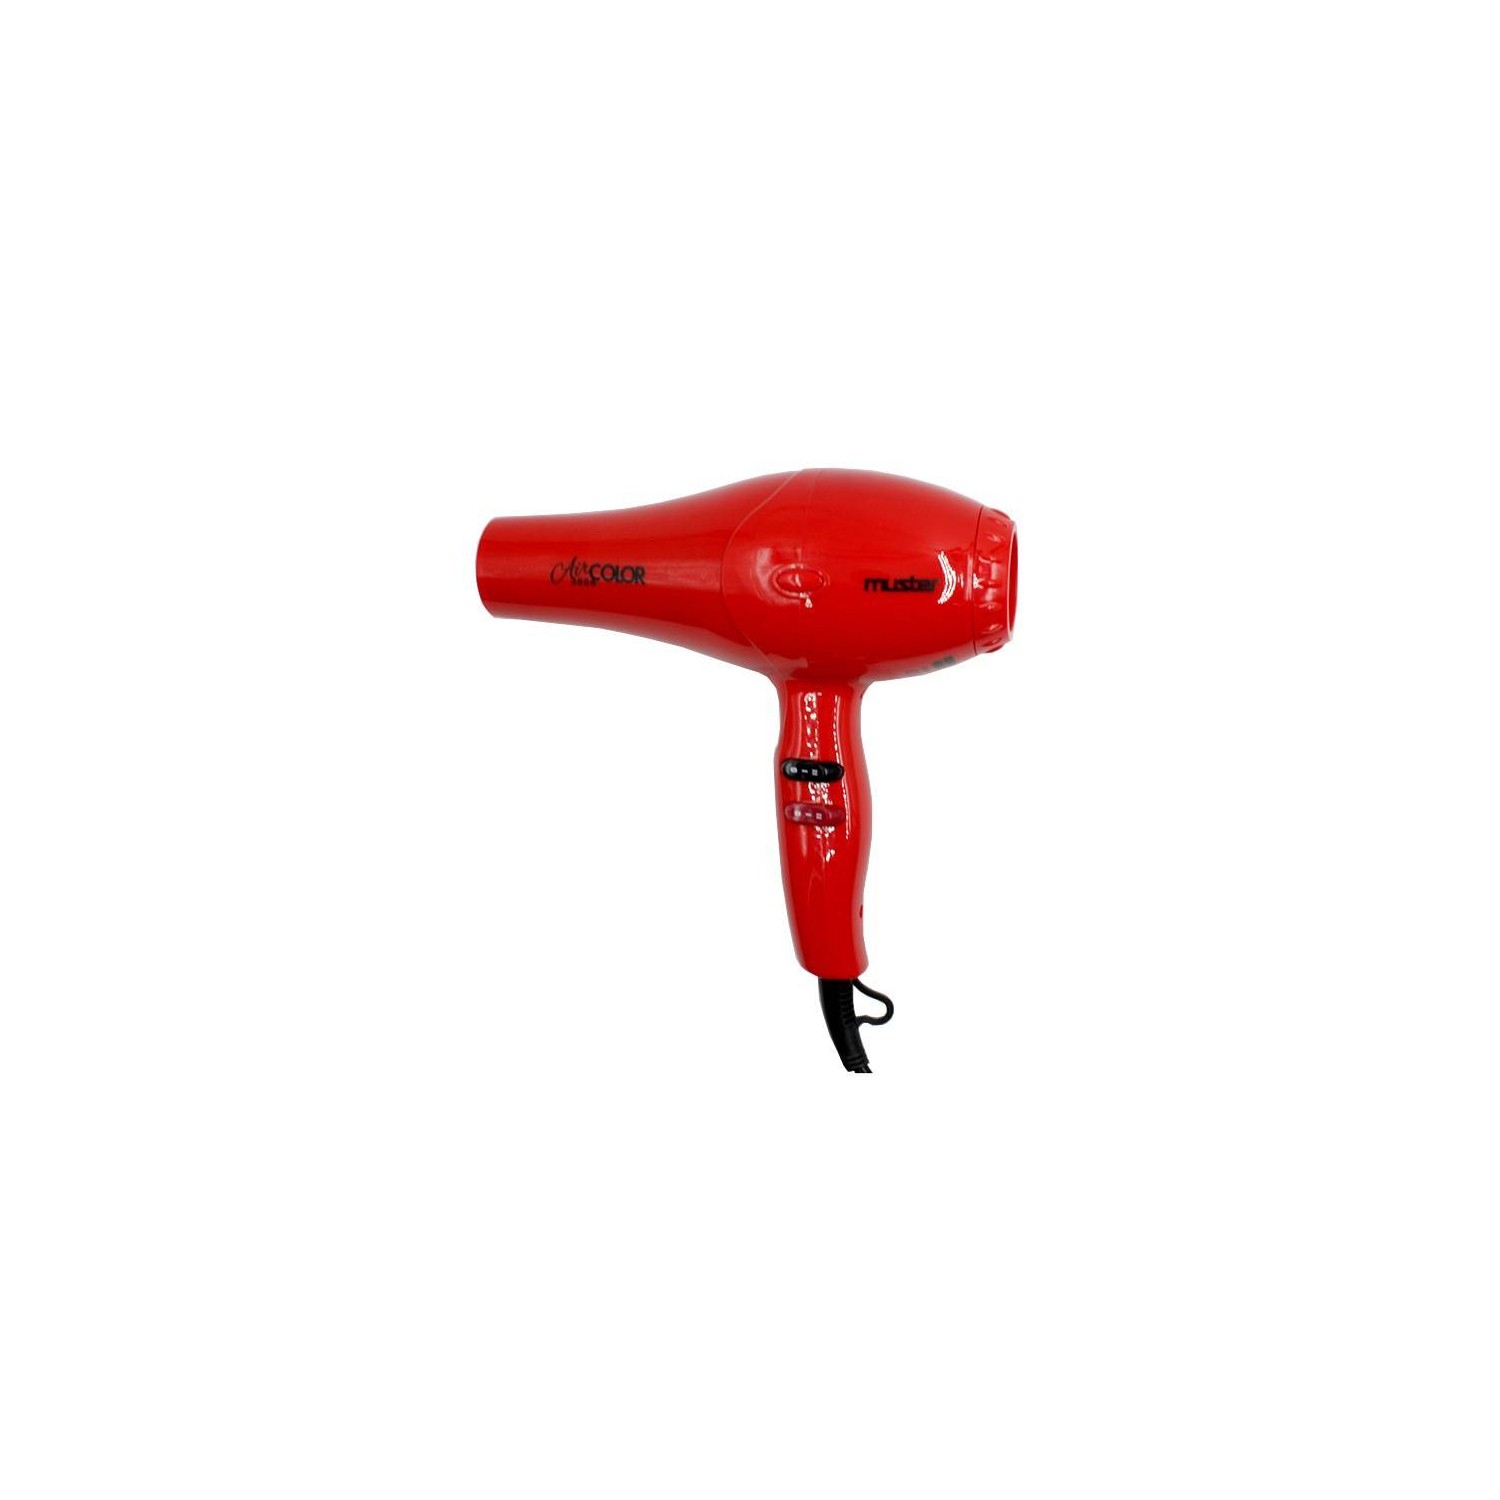 Muster Hair Dryer Air Color 3000 (pink/red)